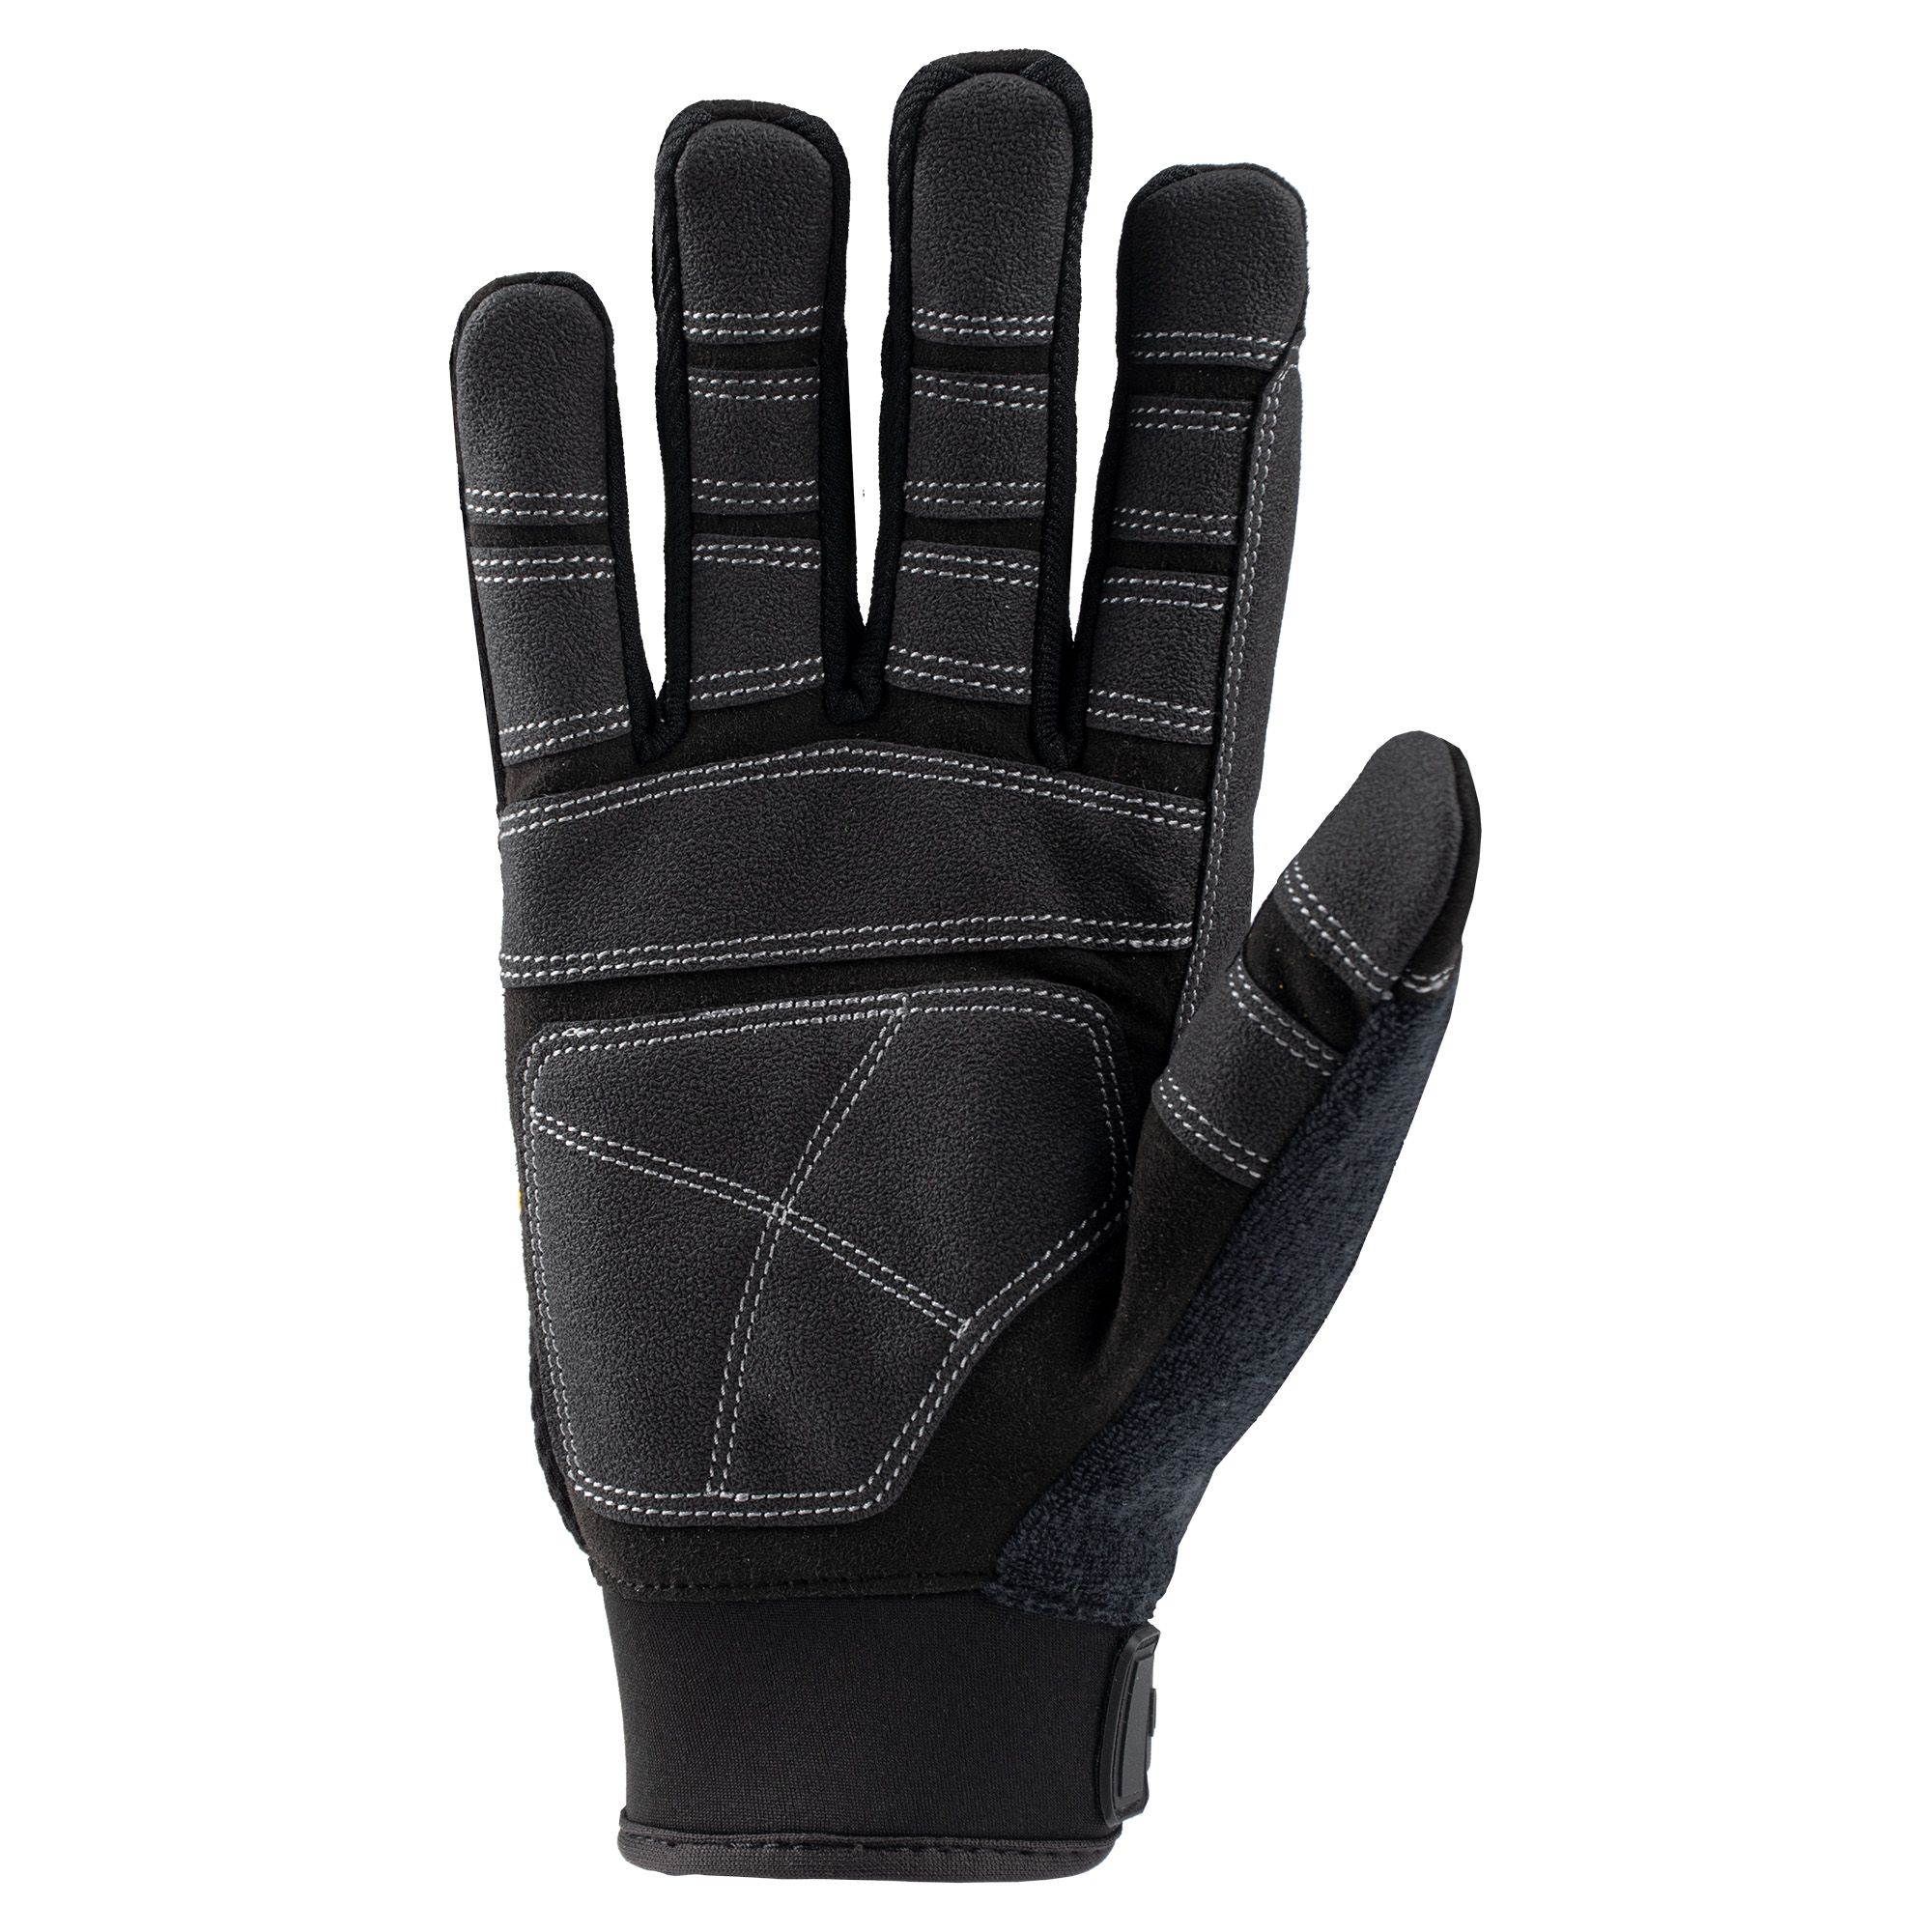 Terra Working Gloves made of Synthetic Leather - X-Large 78907TRXL